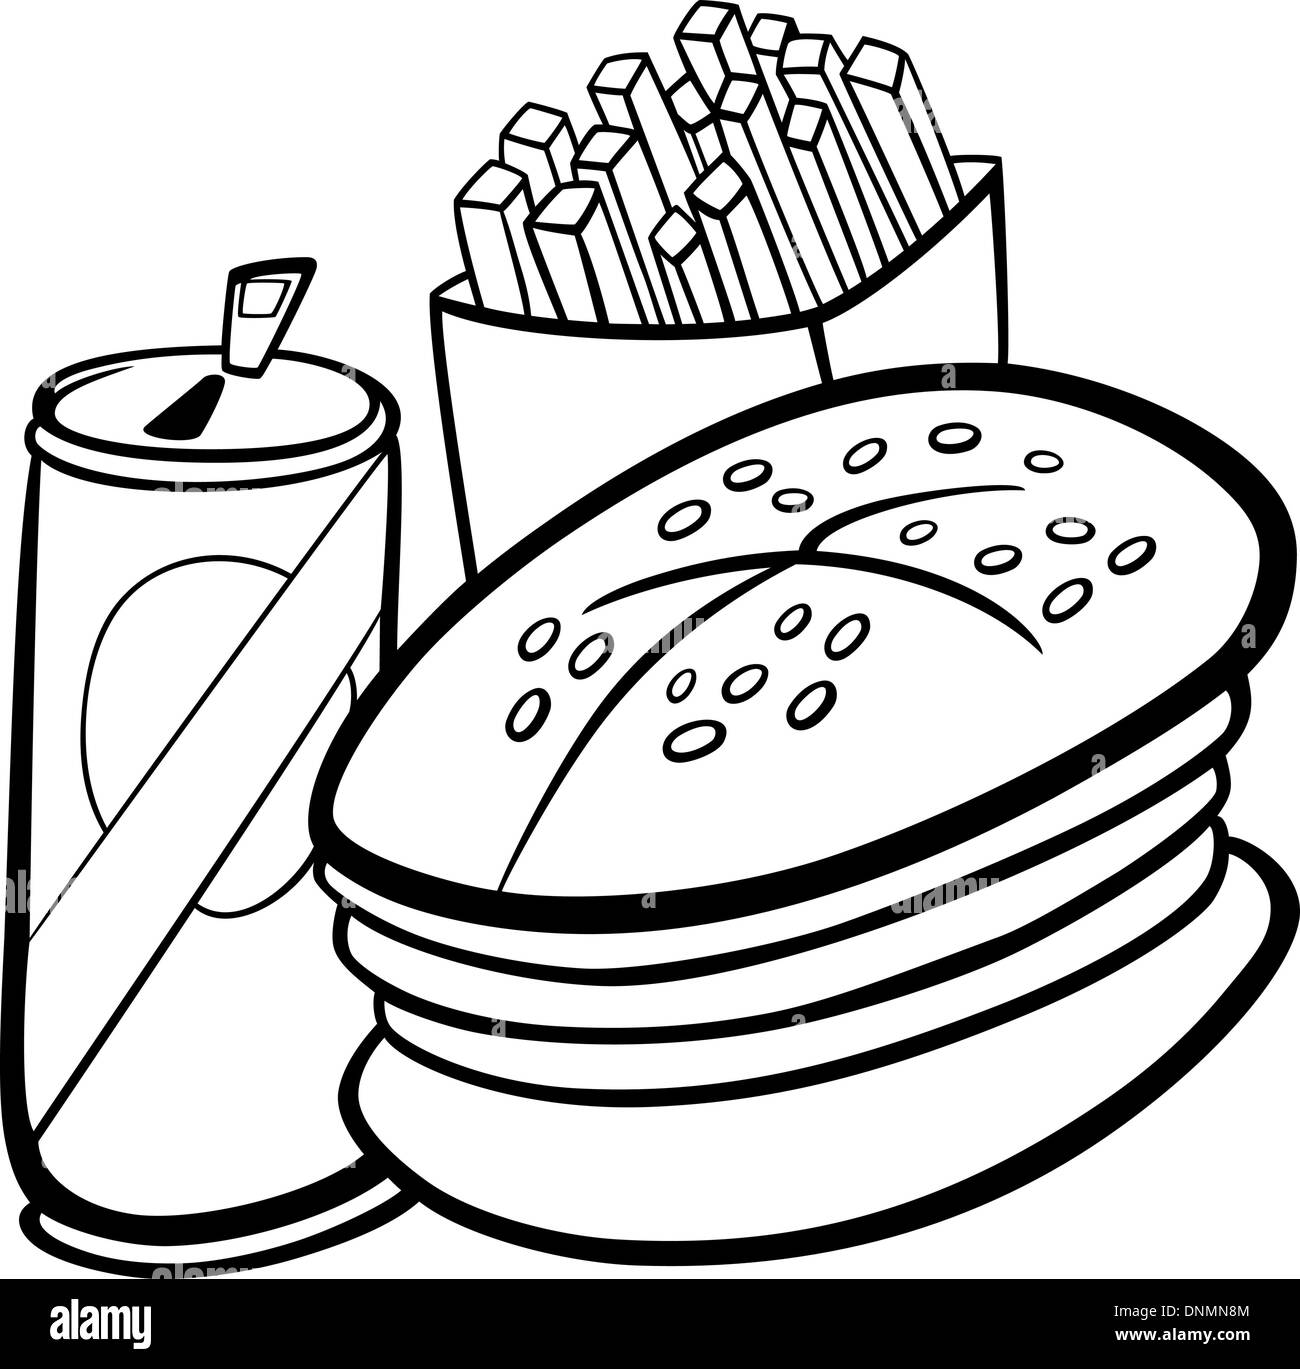 Black and White Cartoon Illustration of Fast Food Set with Hamburger and French Fries and Soda Clip Art for Coloring Book Stock Vector